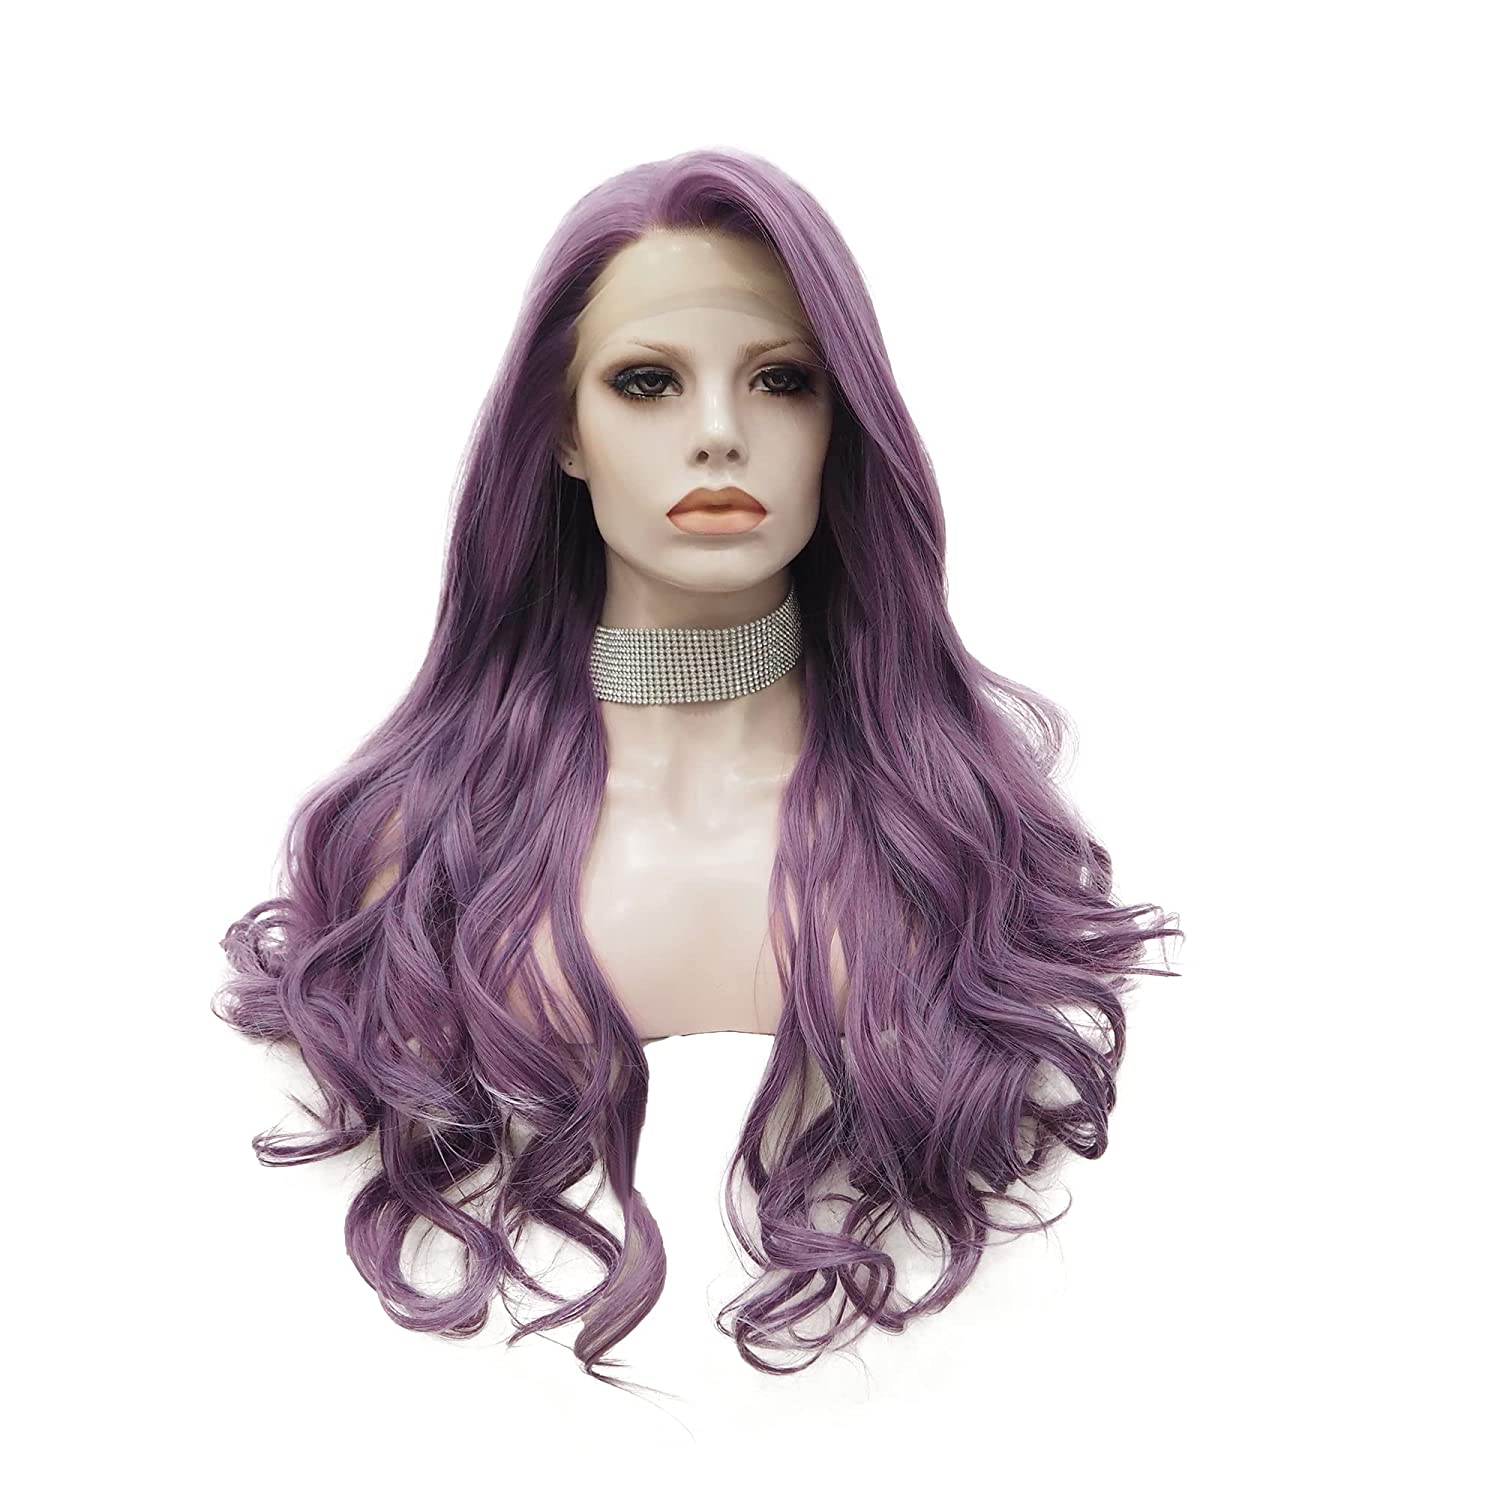  Lavender Purple Wig Long Wave,curly hairstyles short curly hair purple hair aesthetic short bob purple hair purple hair for brunettes purple hair color ideas purple hair costume,purple hair color ideas for brunettes,purple wig costume purple wig with bangs